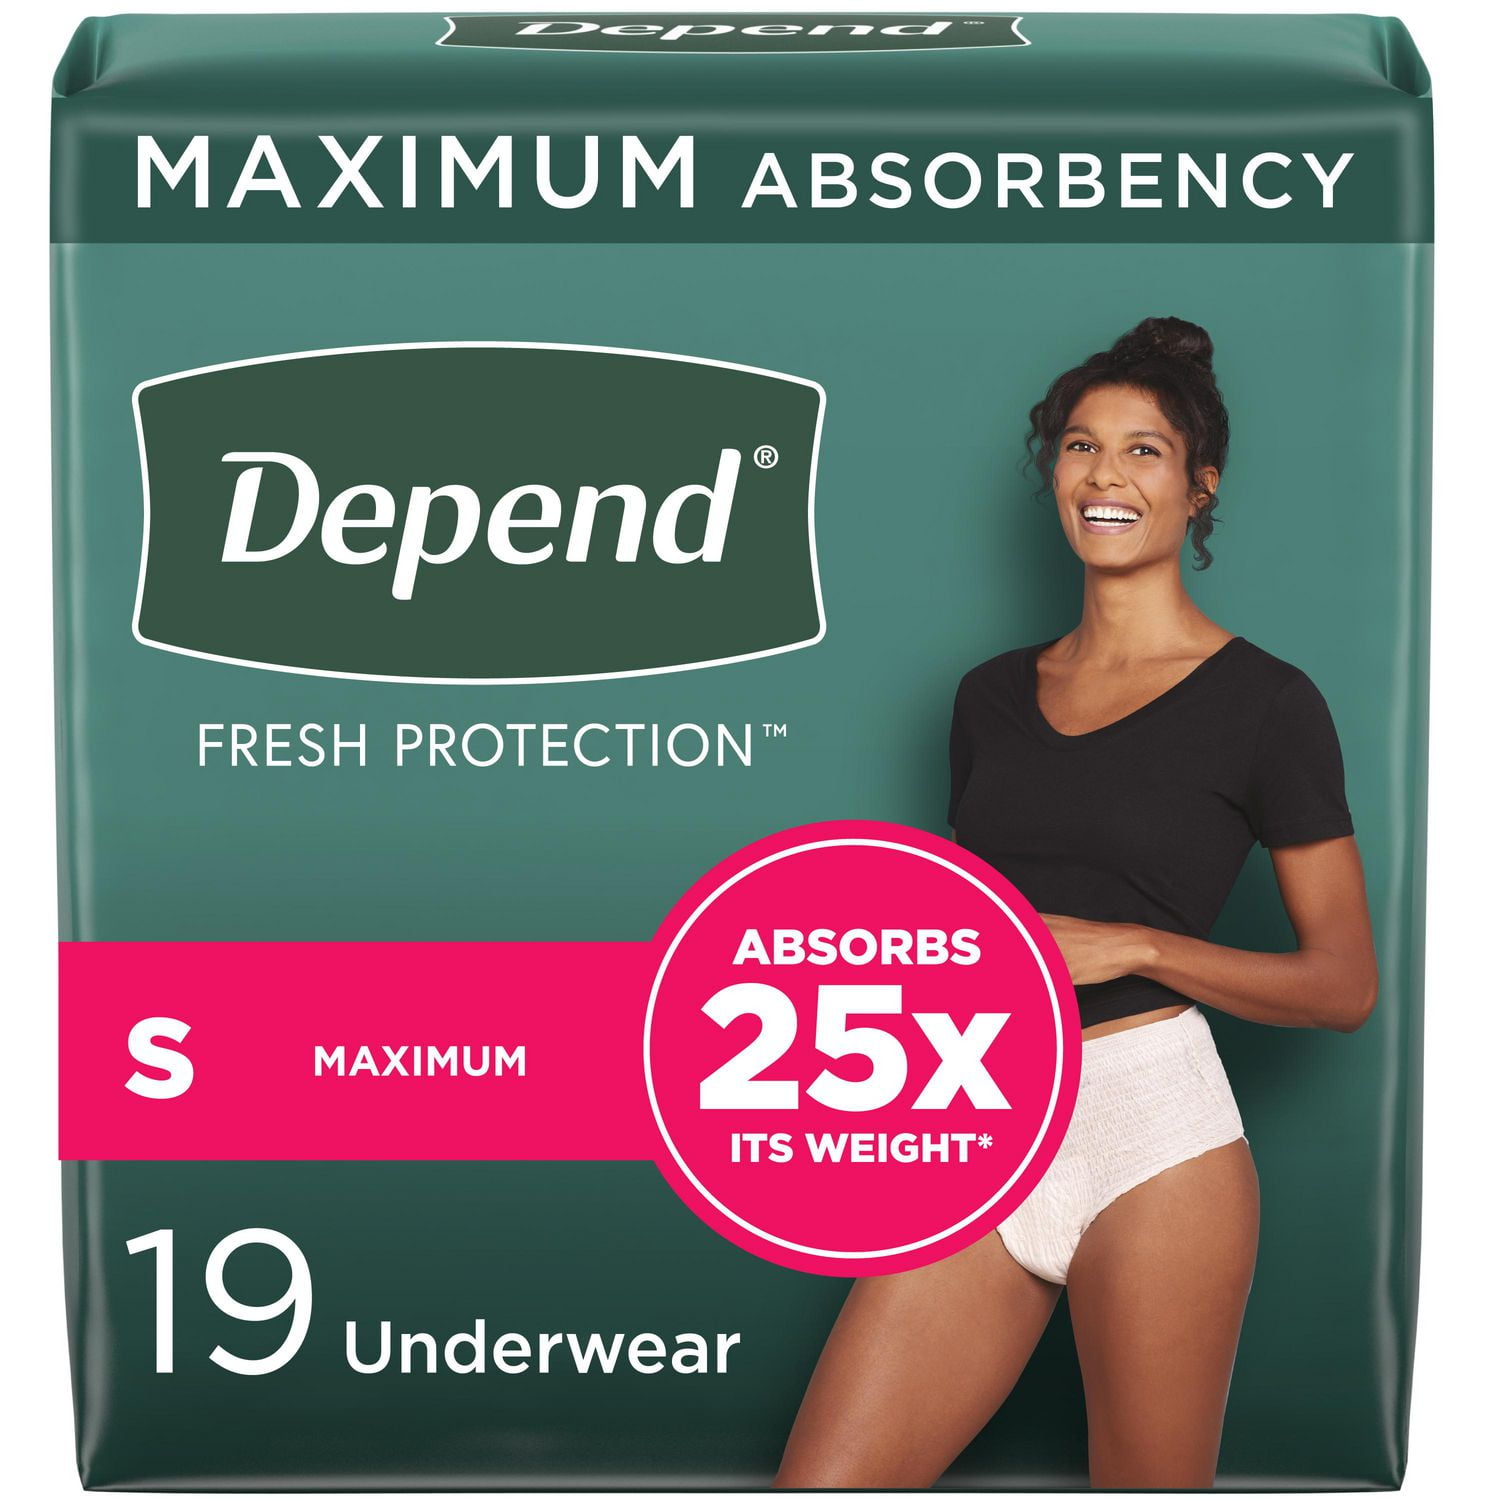  Molasus Incontinence Underwear For Women Heavy Flow